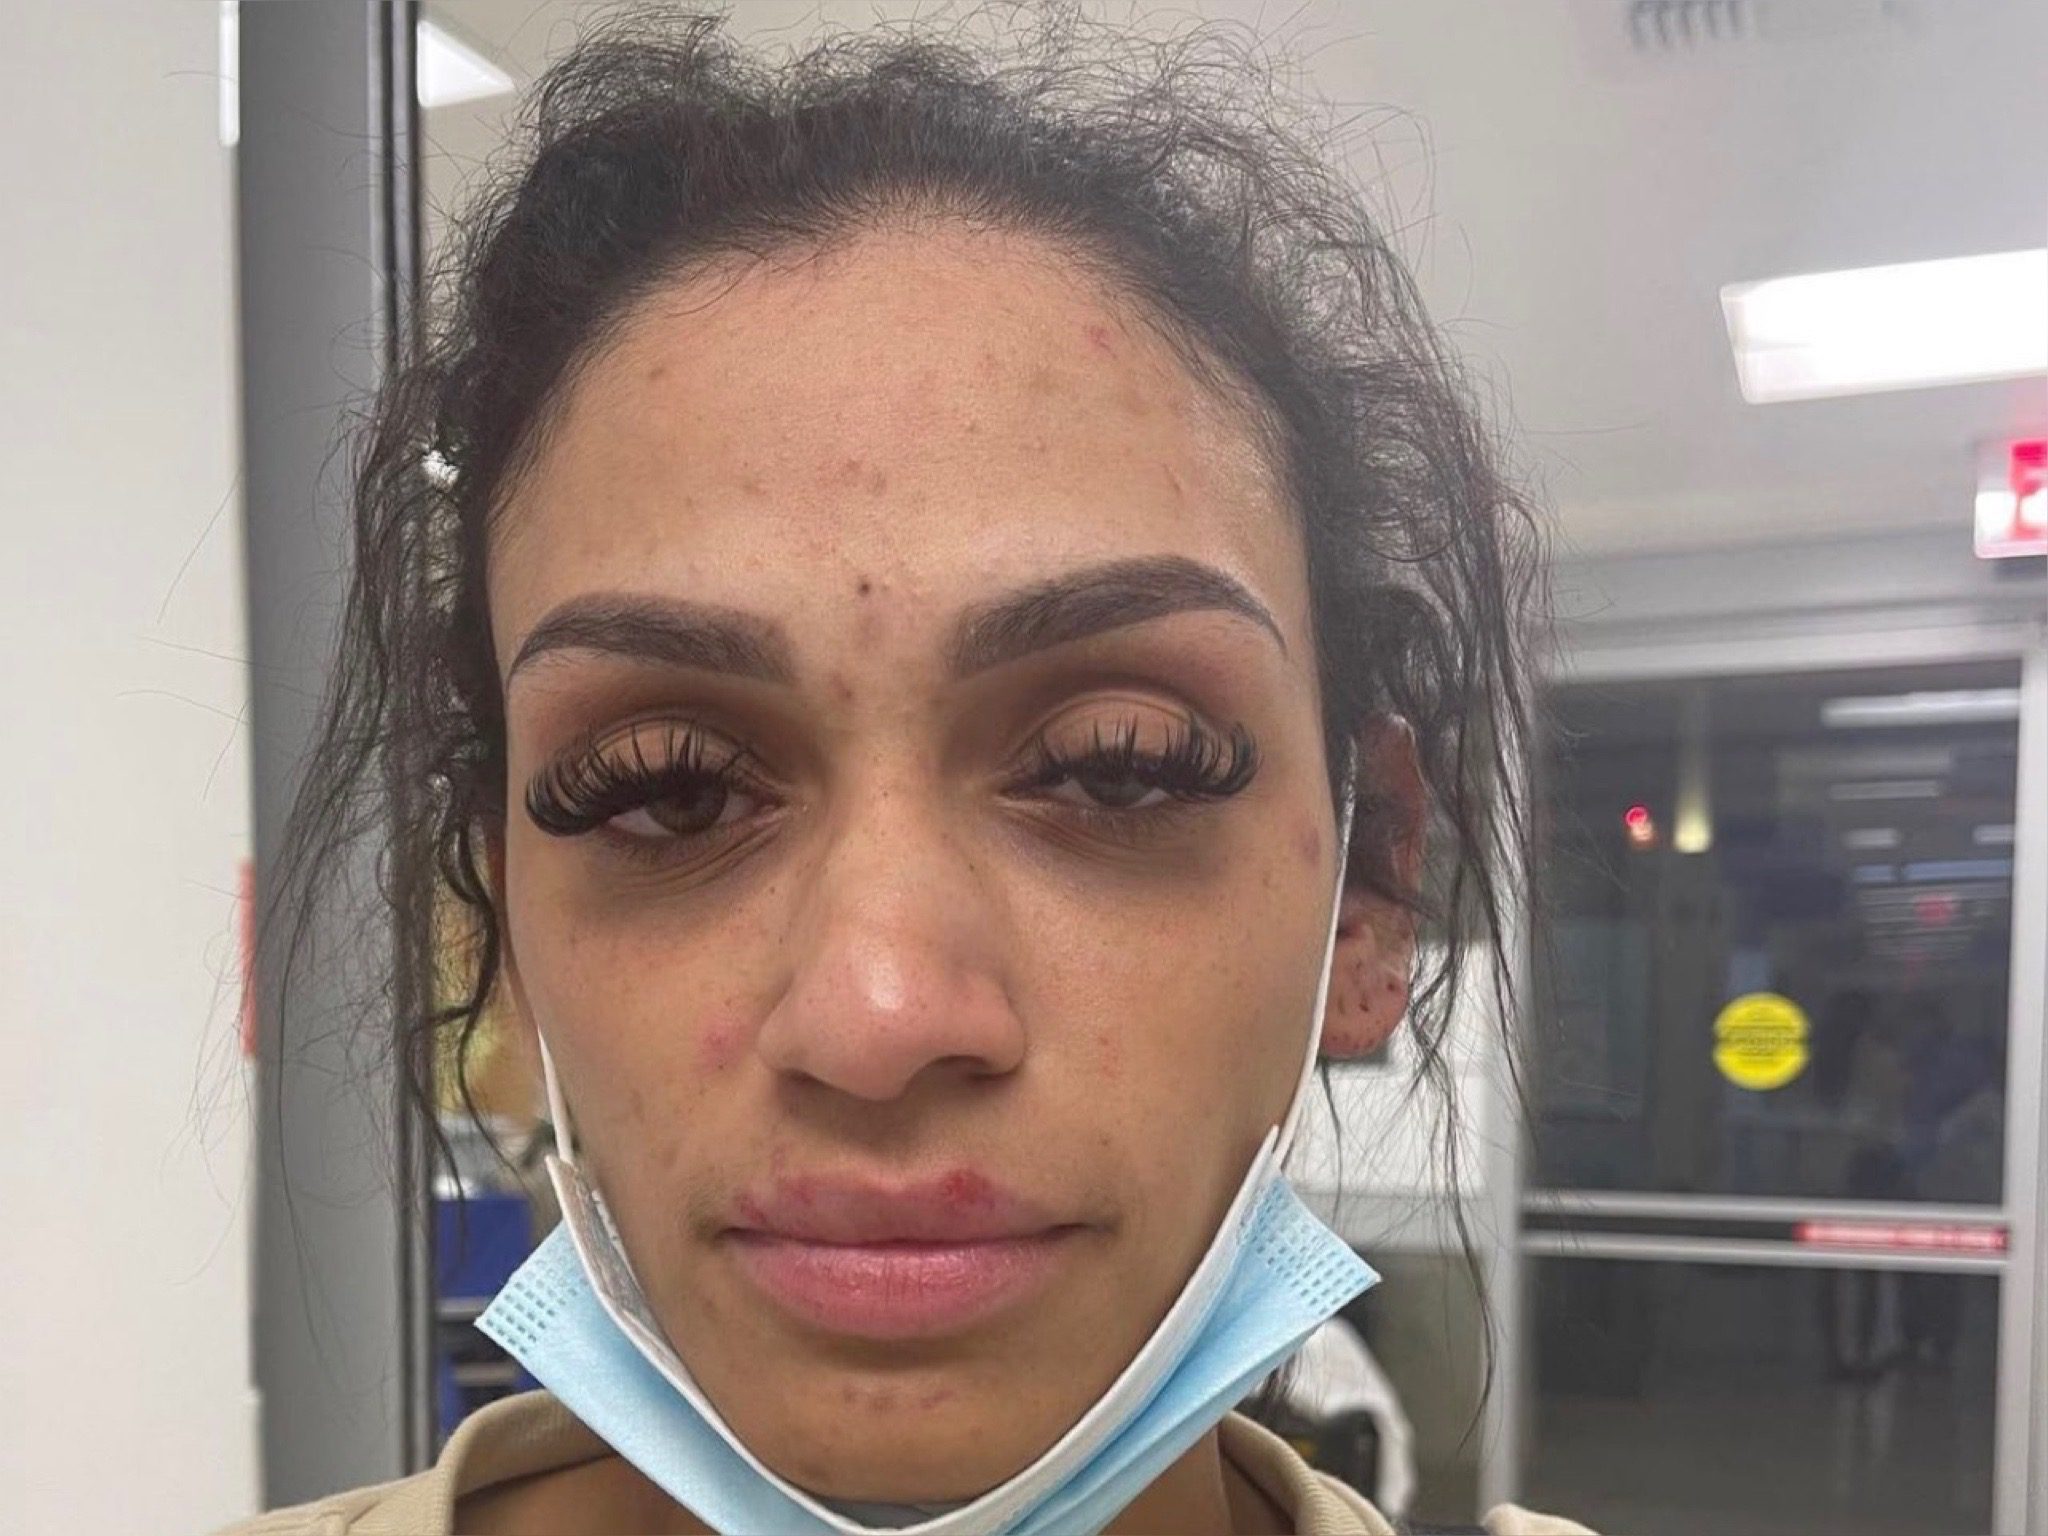 NBA wife shows gruesome photos of her face after being physically abused